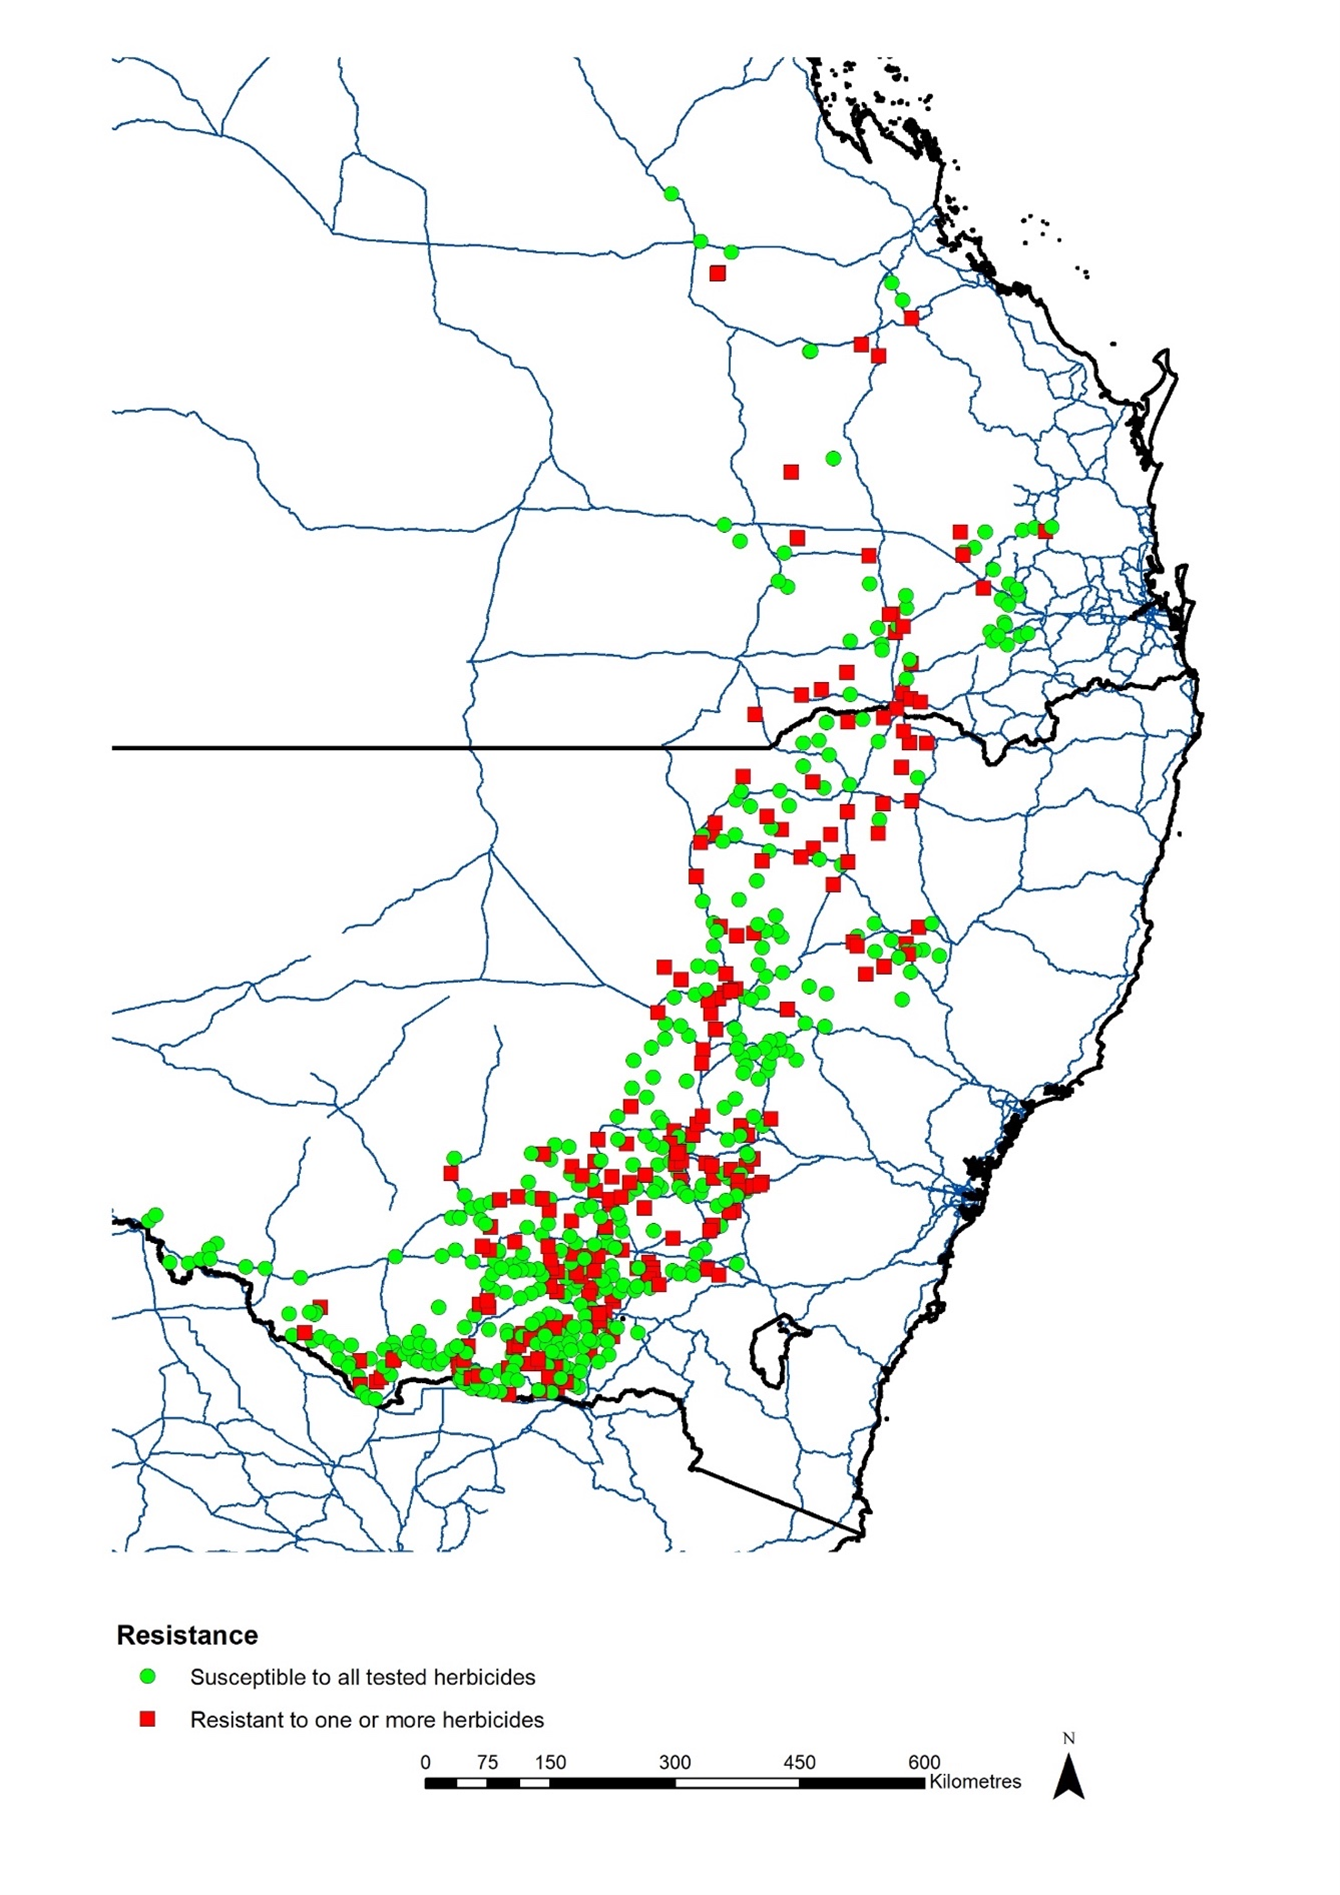 This map shows the distribution of northern region wild oat populations that are herbicide susceptible (green circles) or resistant (red squares).